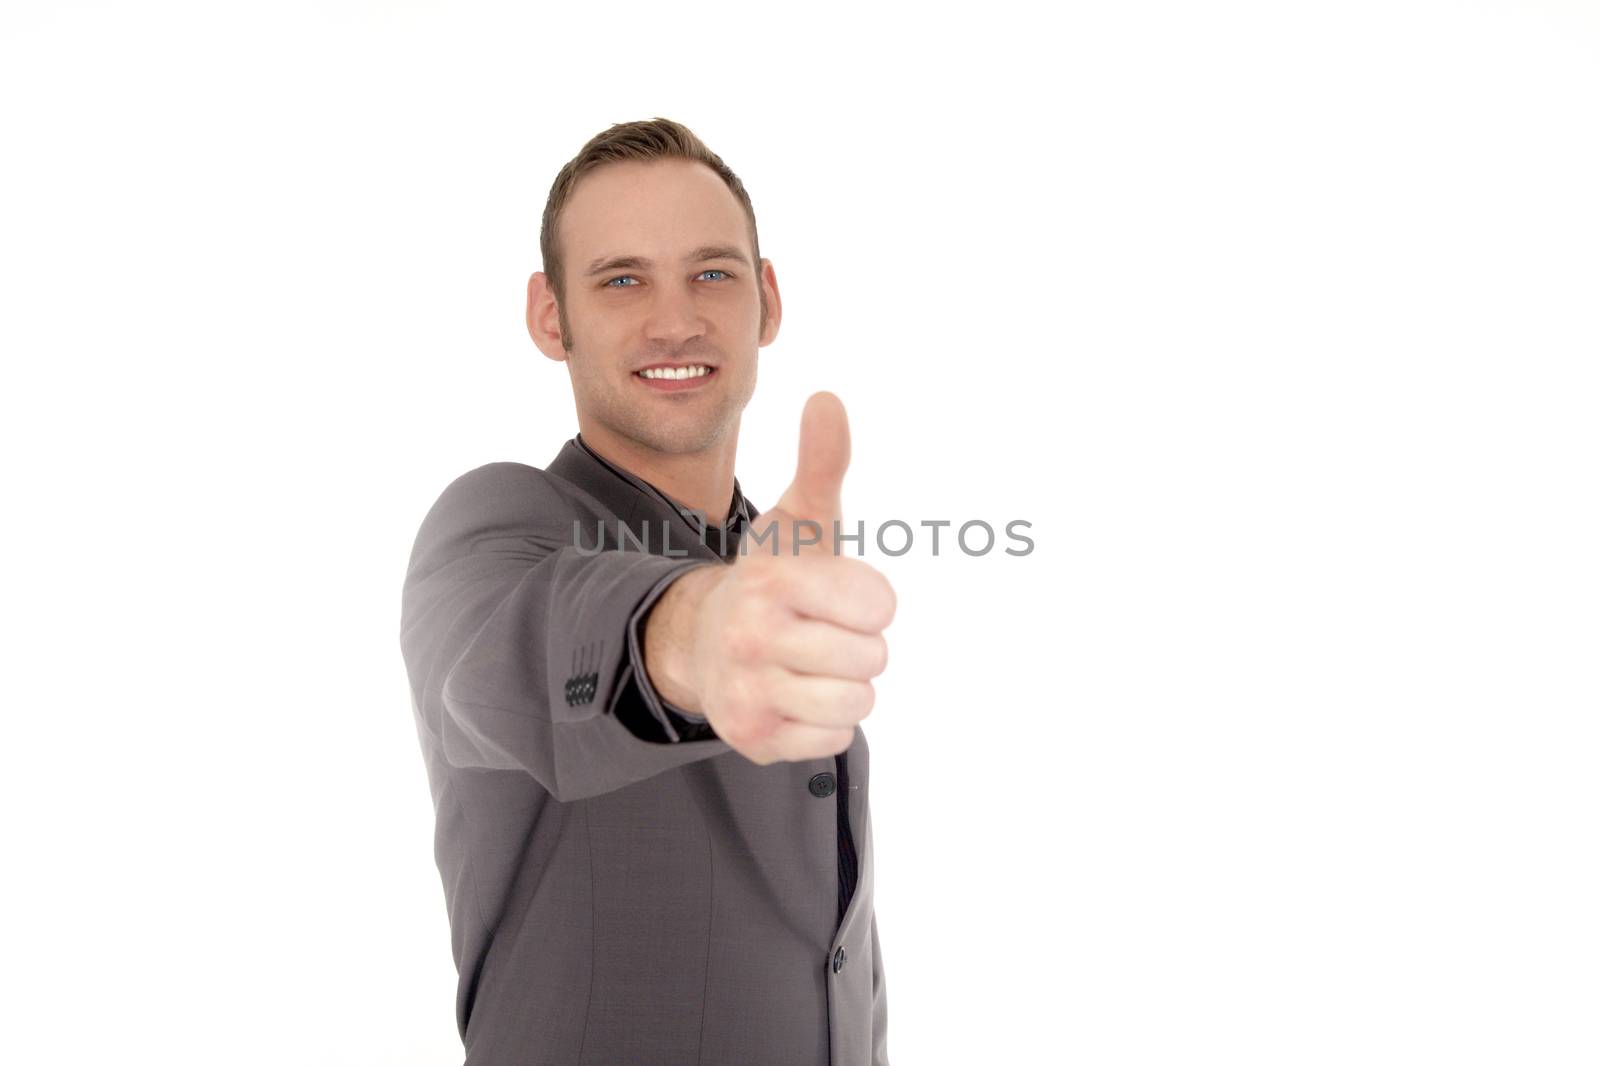 Handsome young businessman giving a thumbs up gesture of success, approval or agreement isolated on white